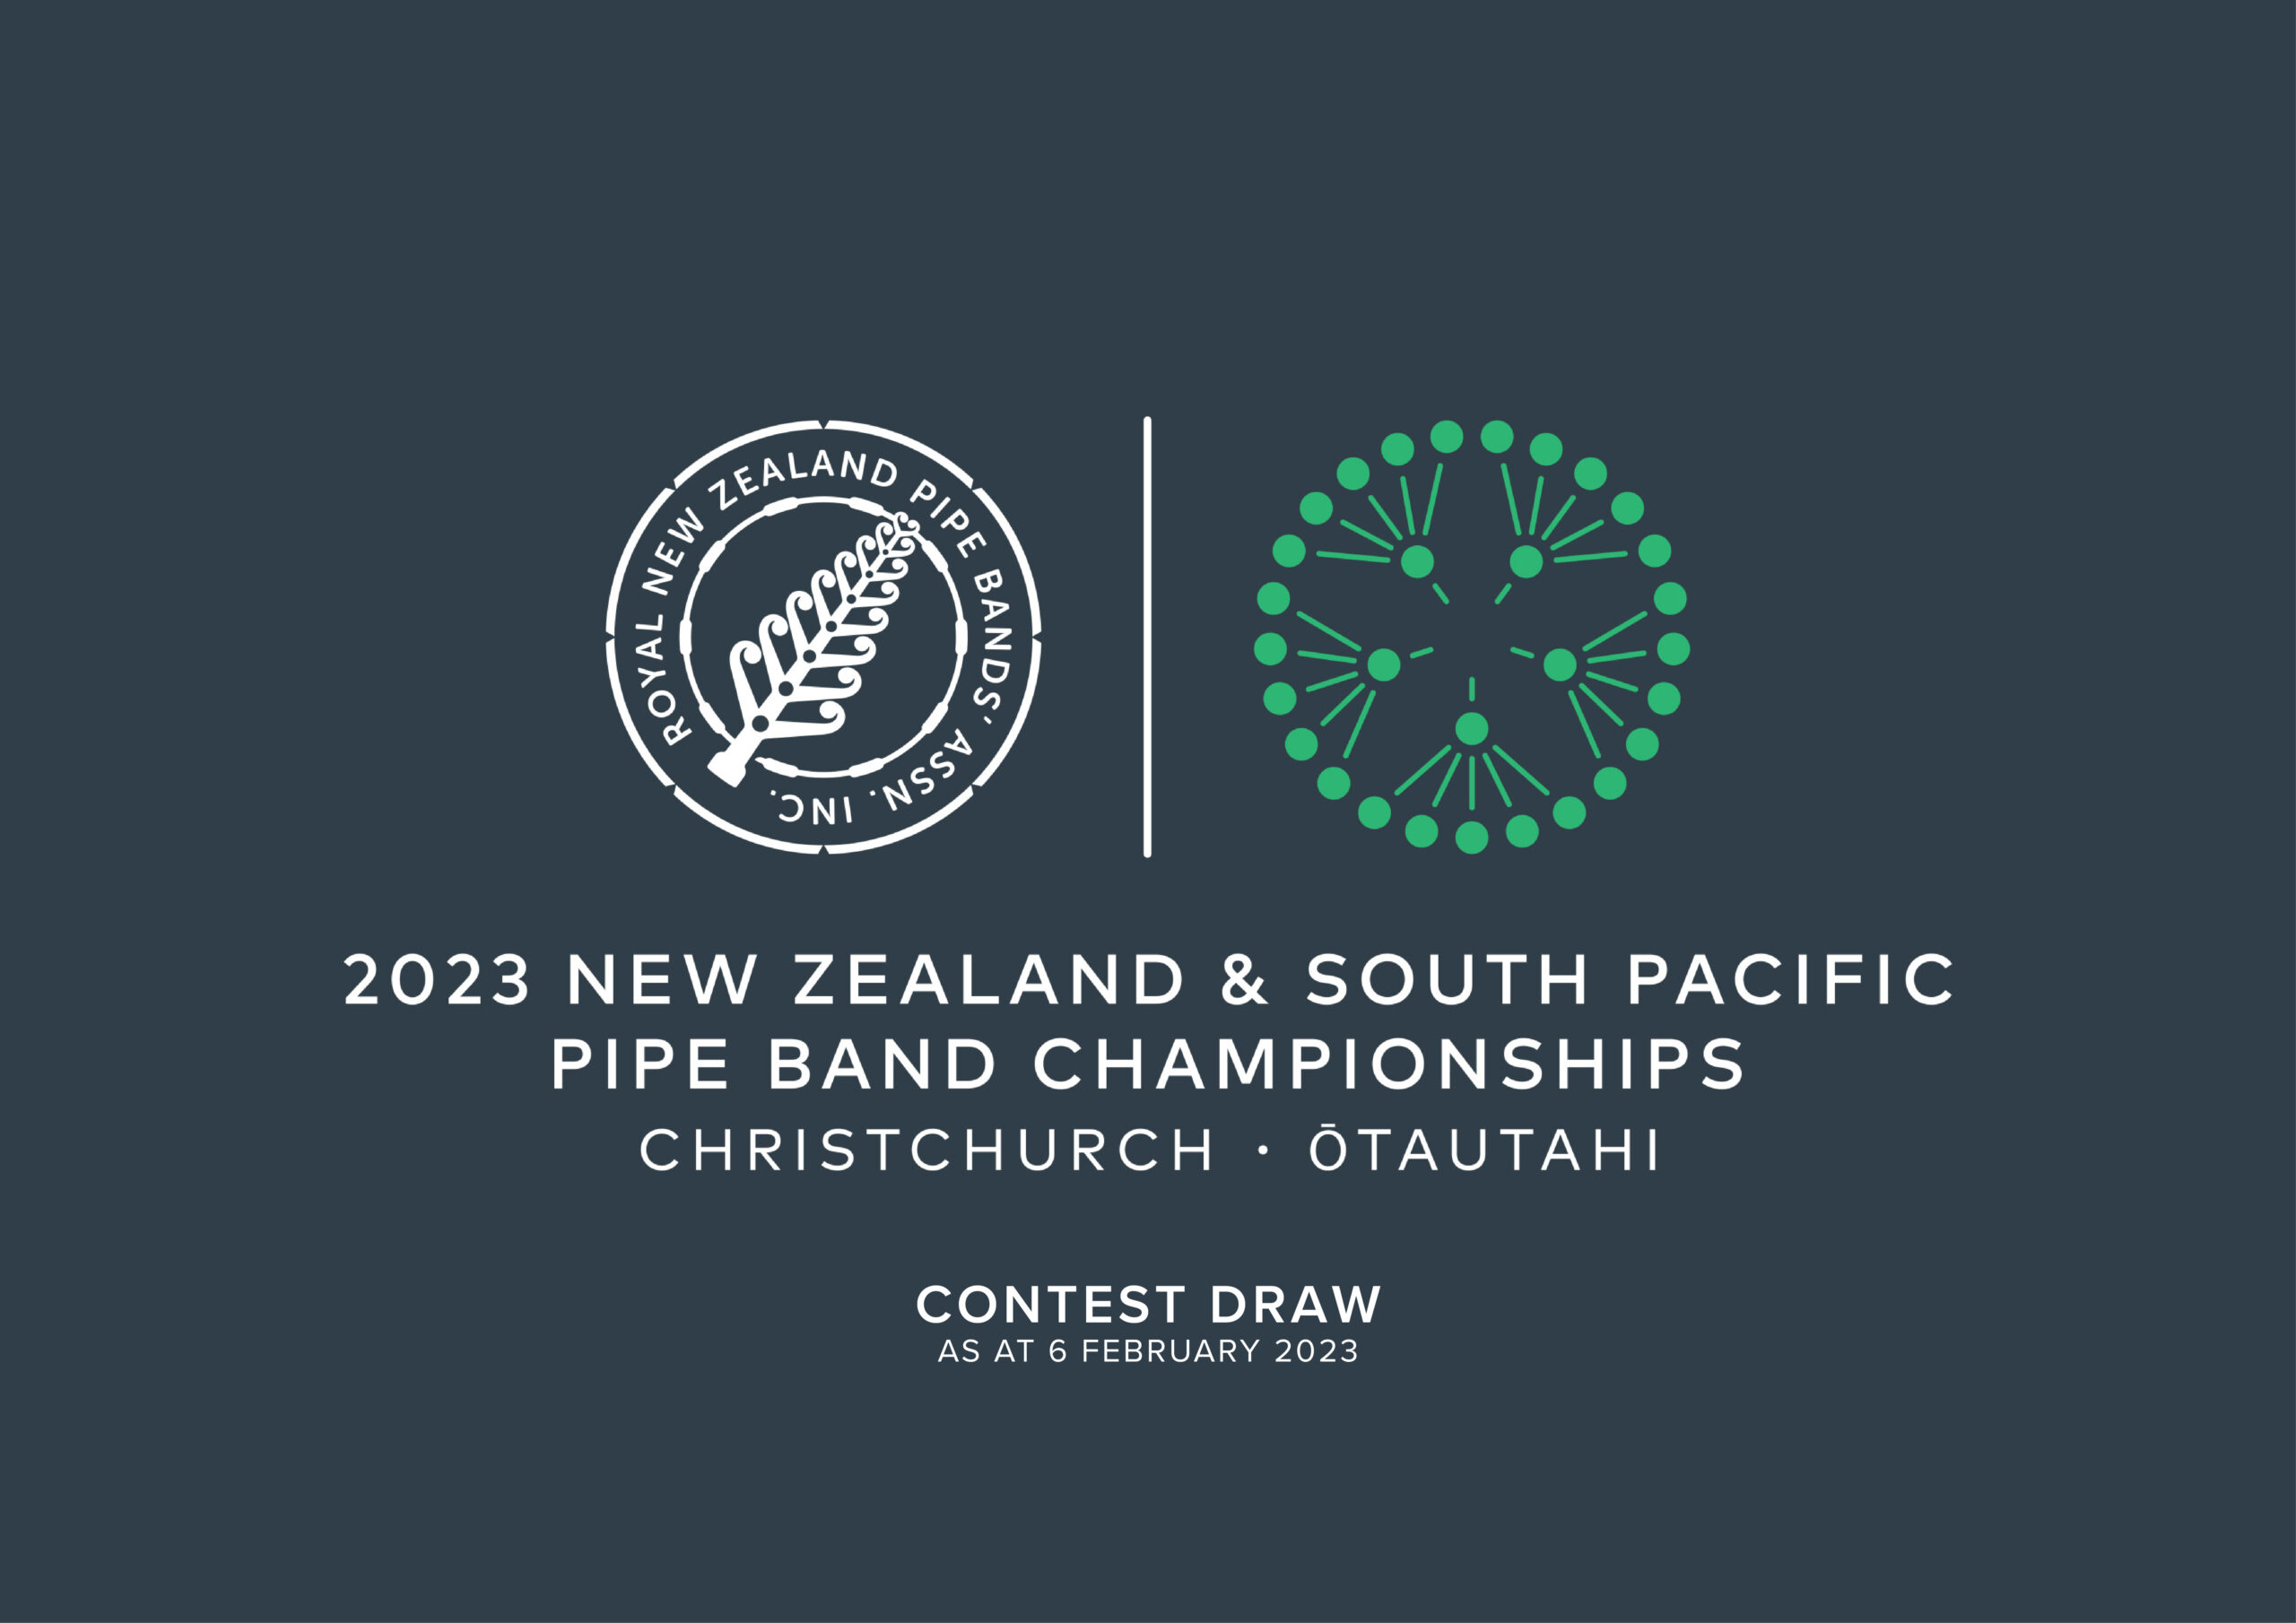 Final draw for the 2023 New Zealand and South Pacific Pipe Band Championships